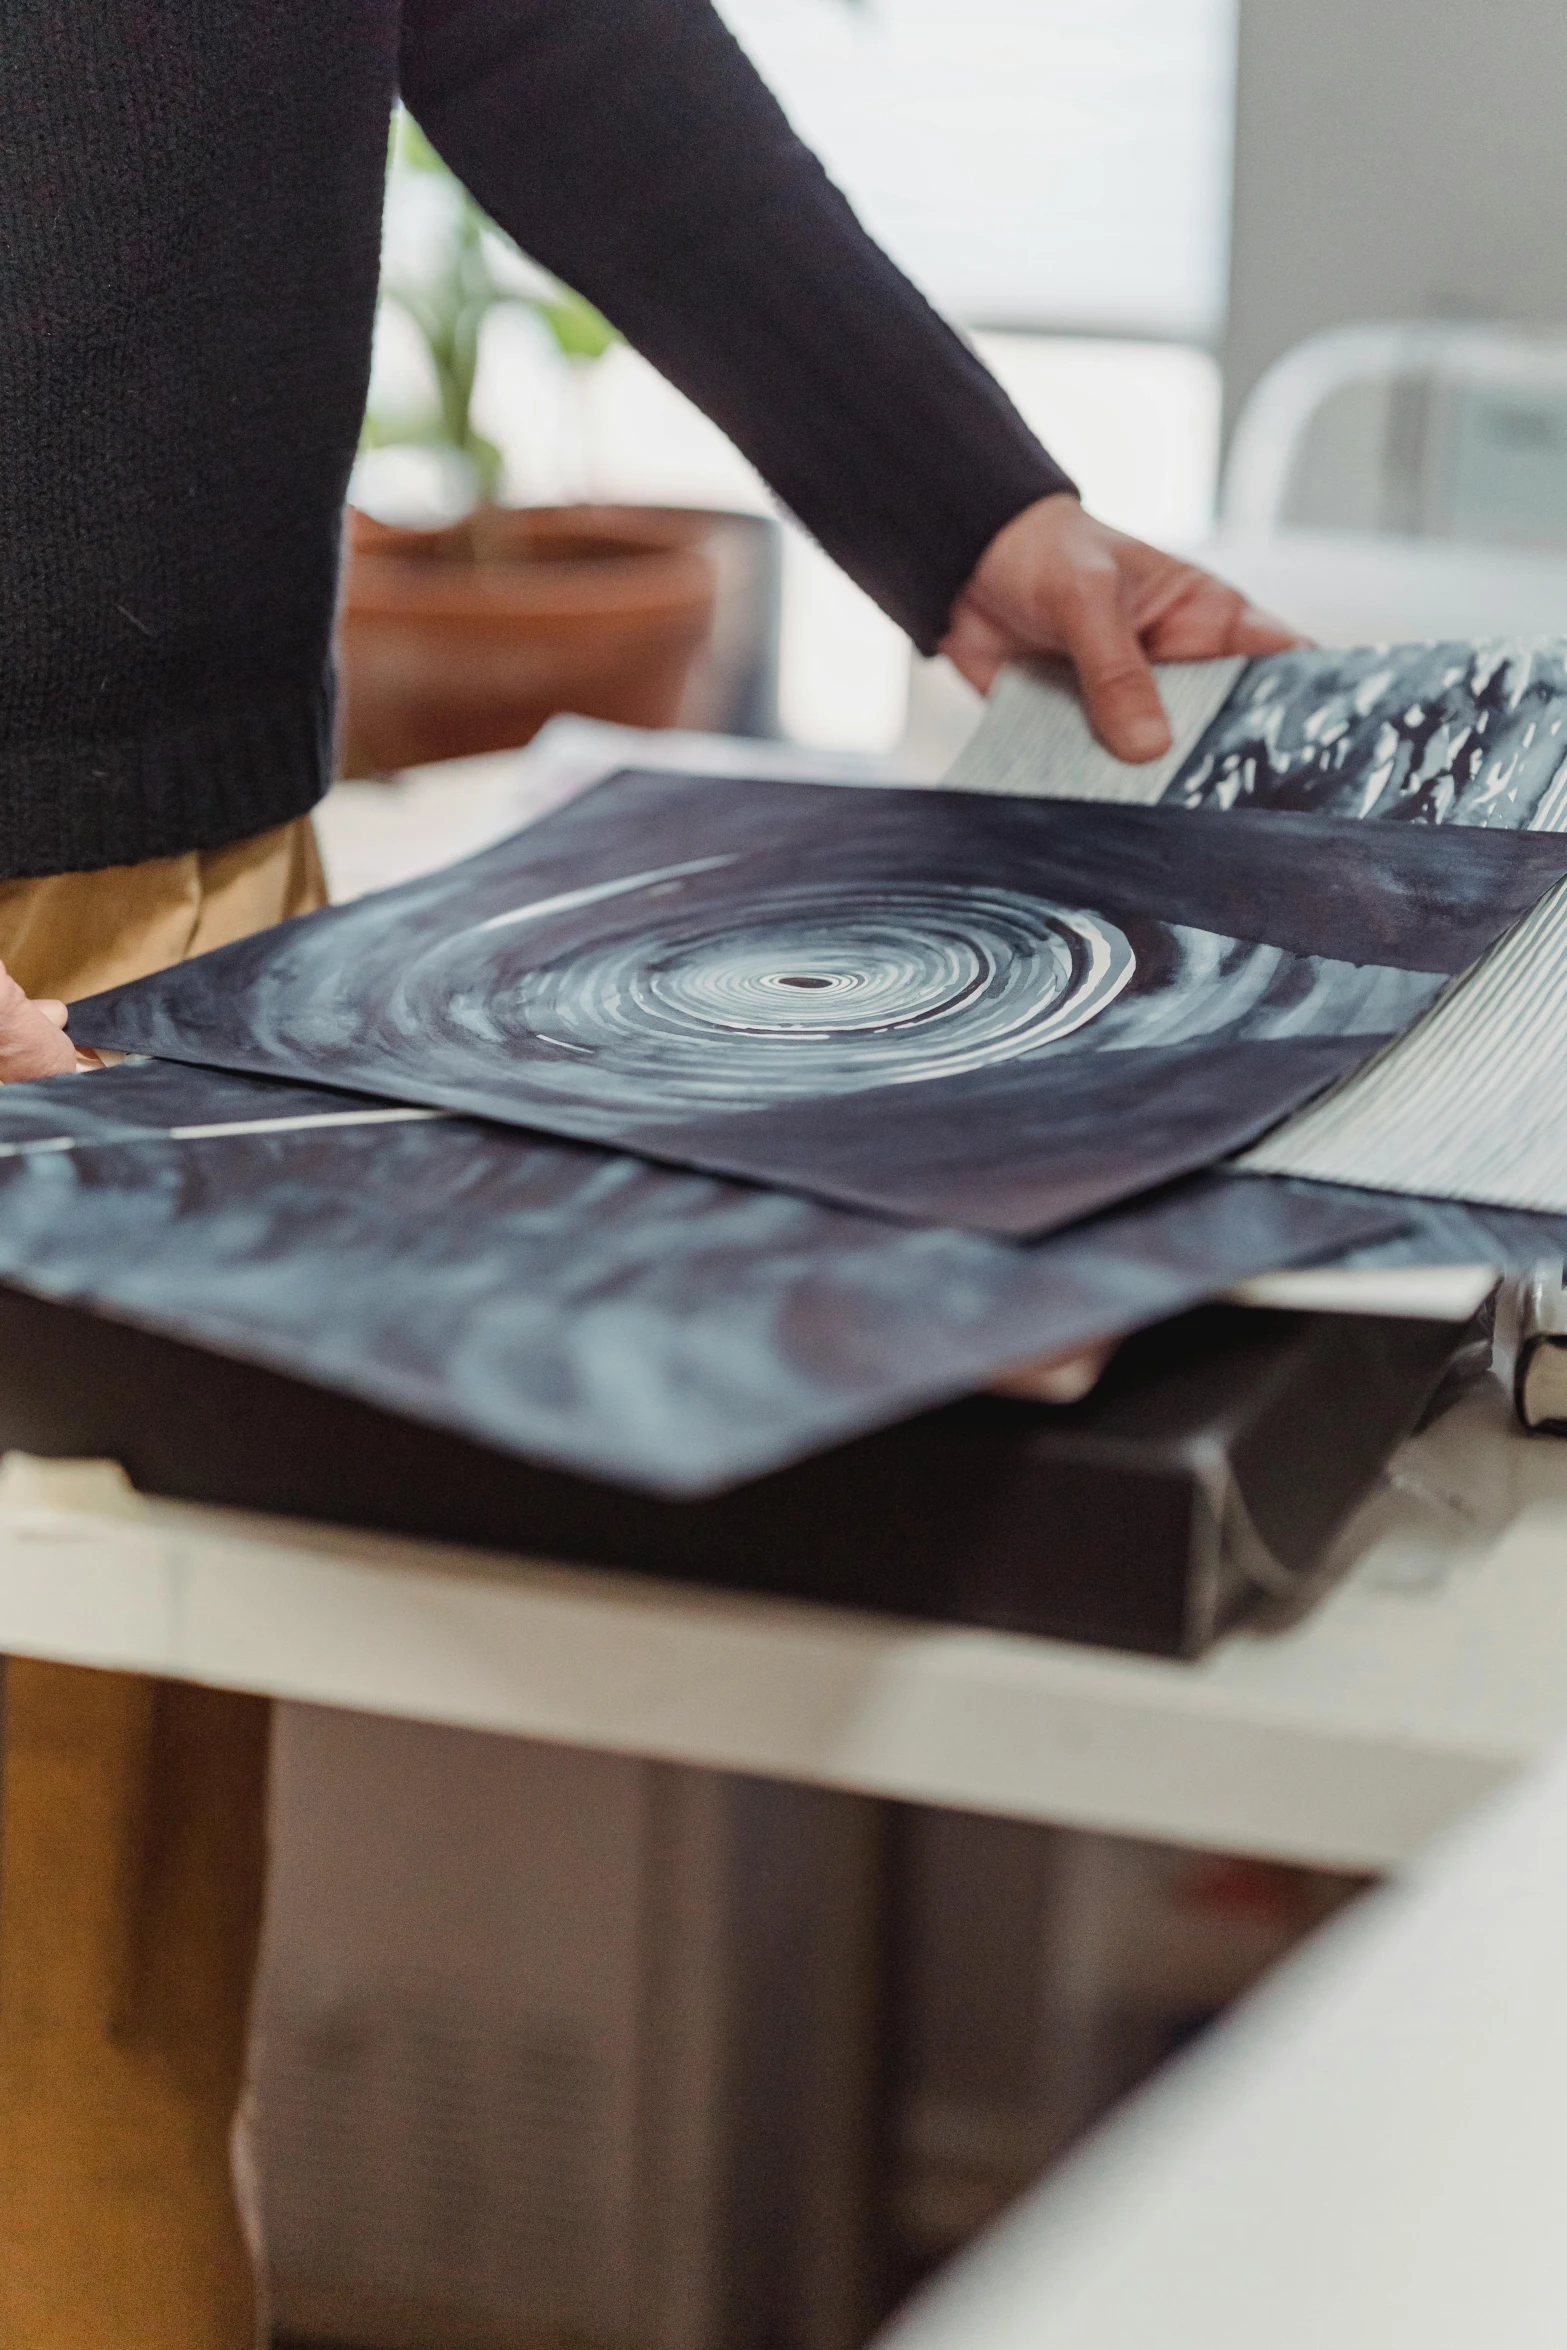 a man that is standing in front of a desk, an album cover, trending on unsplash, process art, spinning records, xray art, high detailed print, medium close up shot